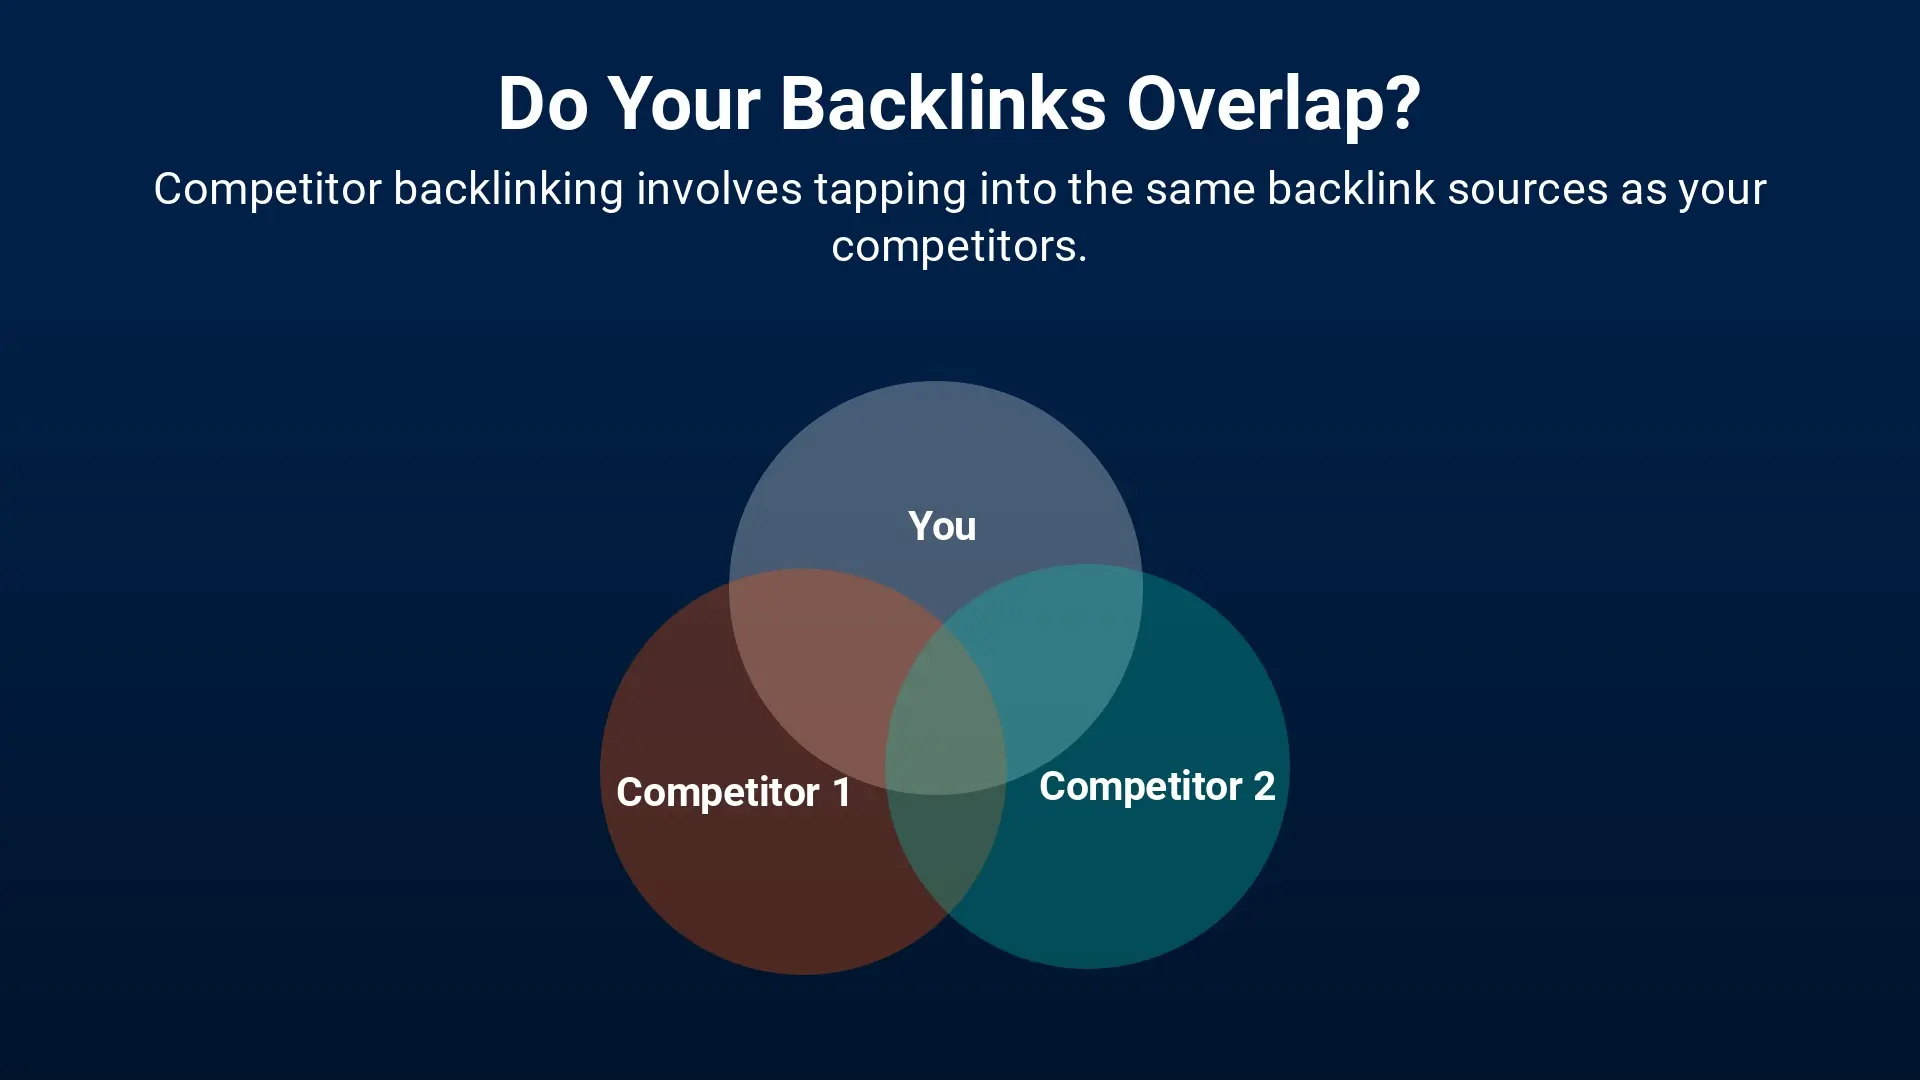 Venn Diagram showing competitors backlink profiles overlapping